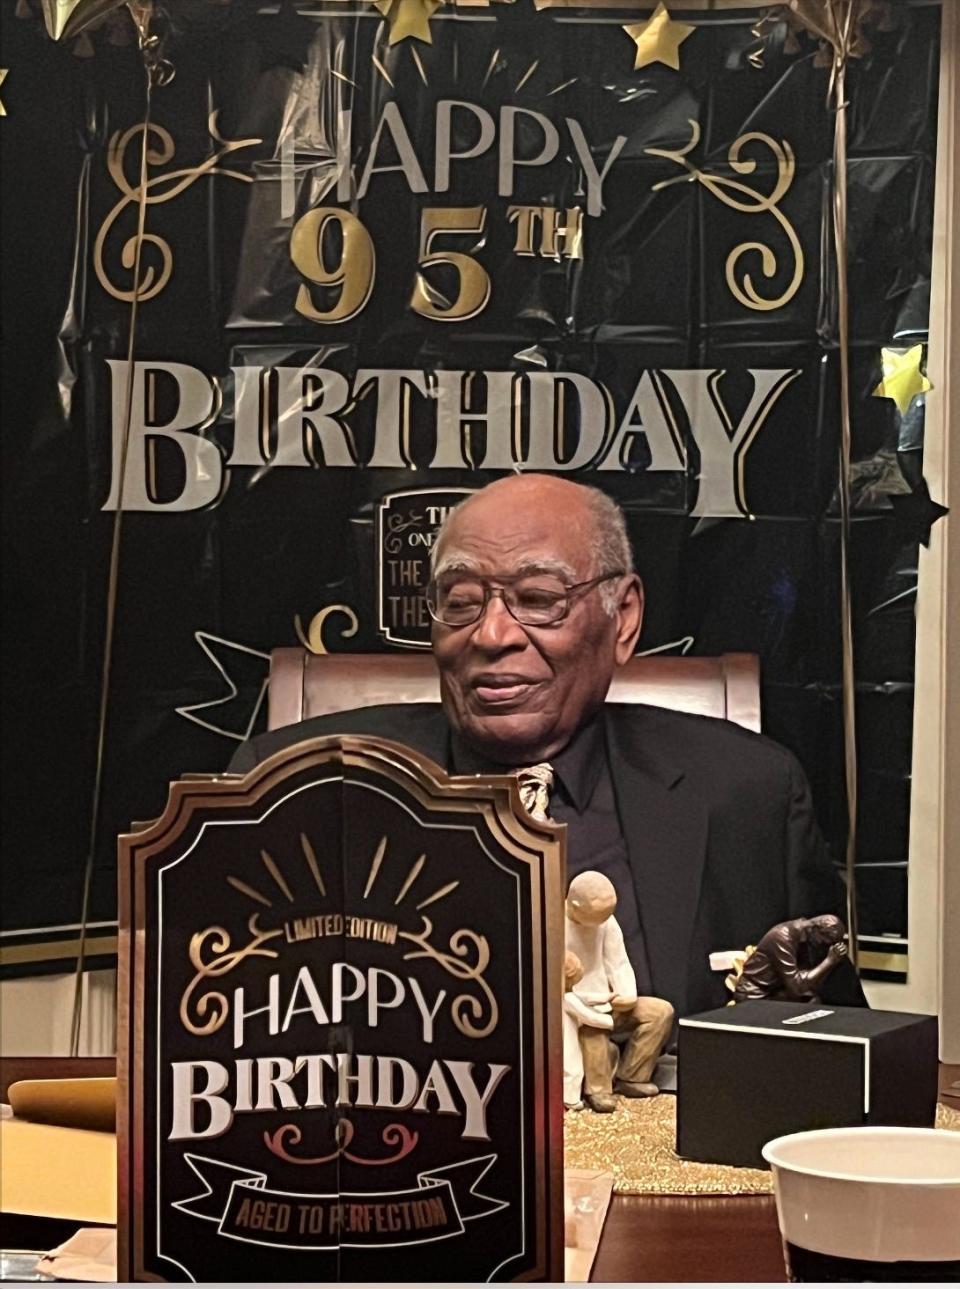 Alphonso Gibbs Sr. celebrated his 95th birthday at home in East Greenwich with his family last Thursday.